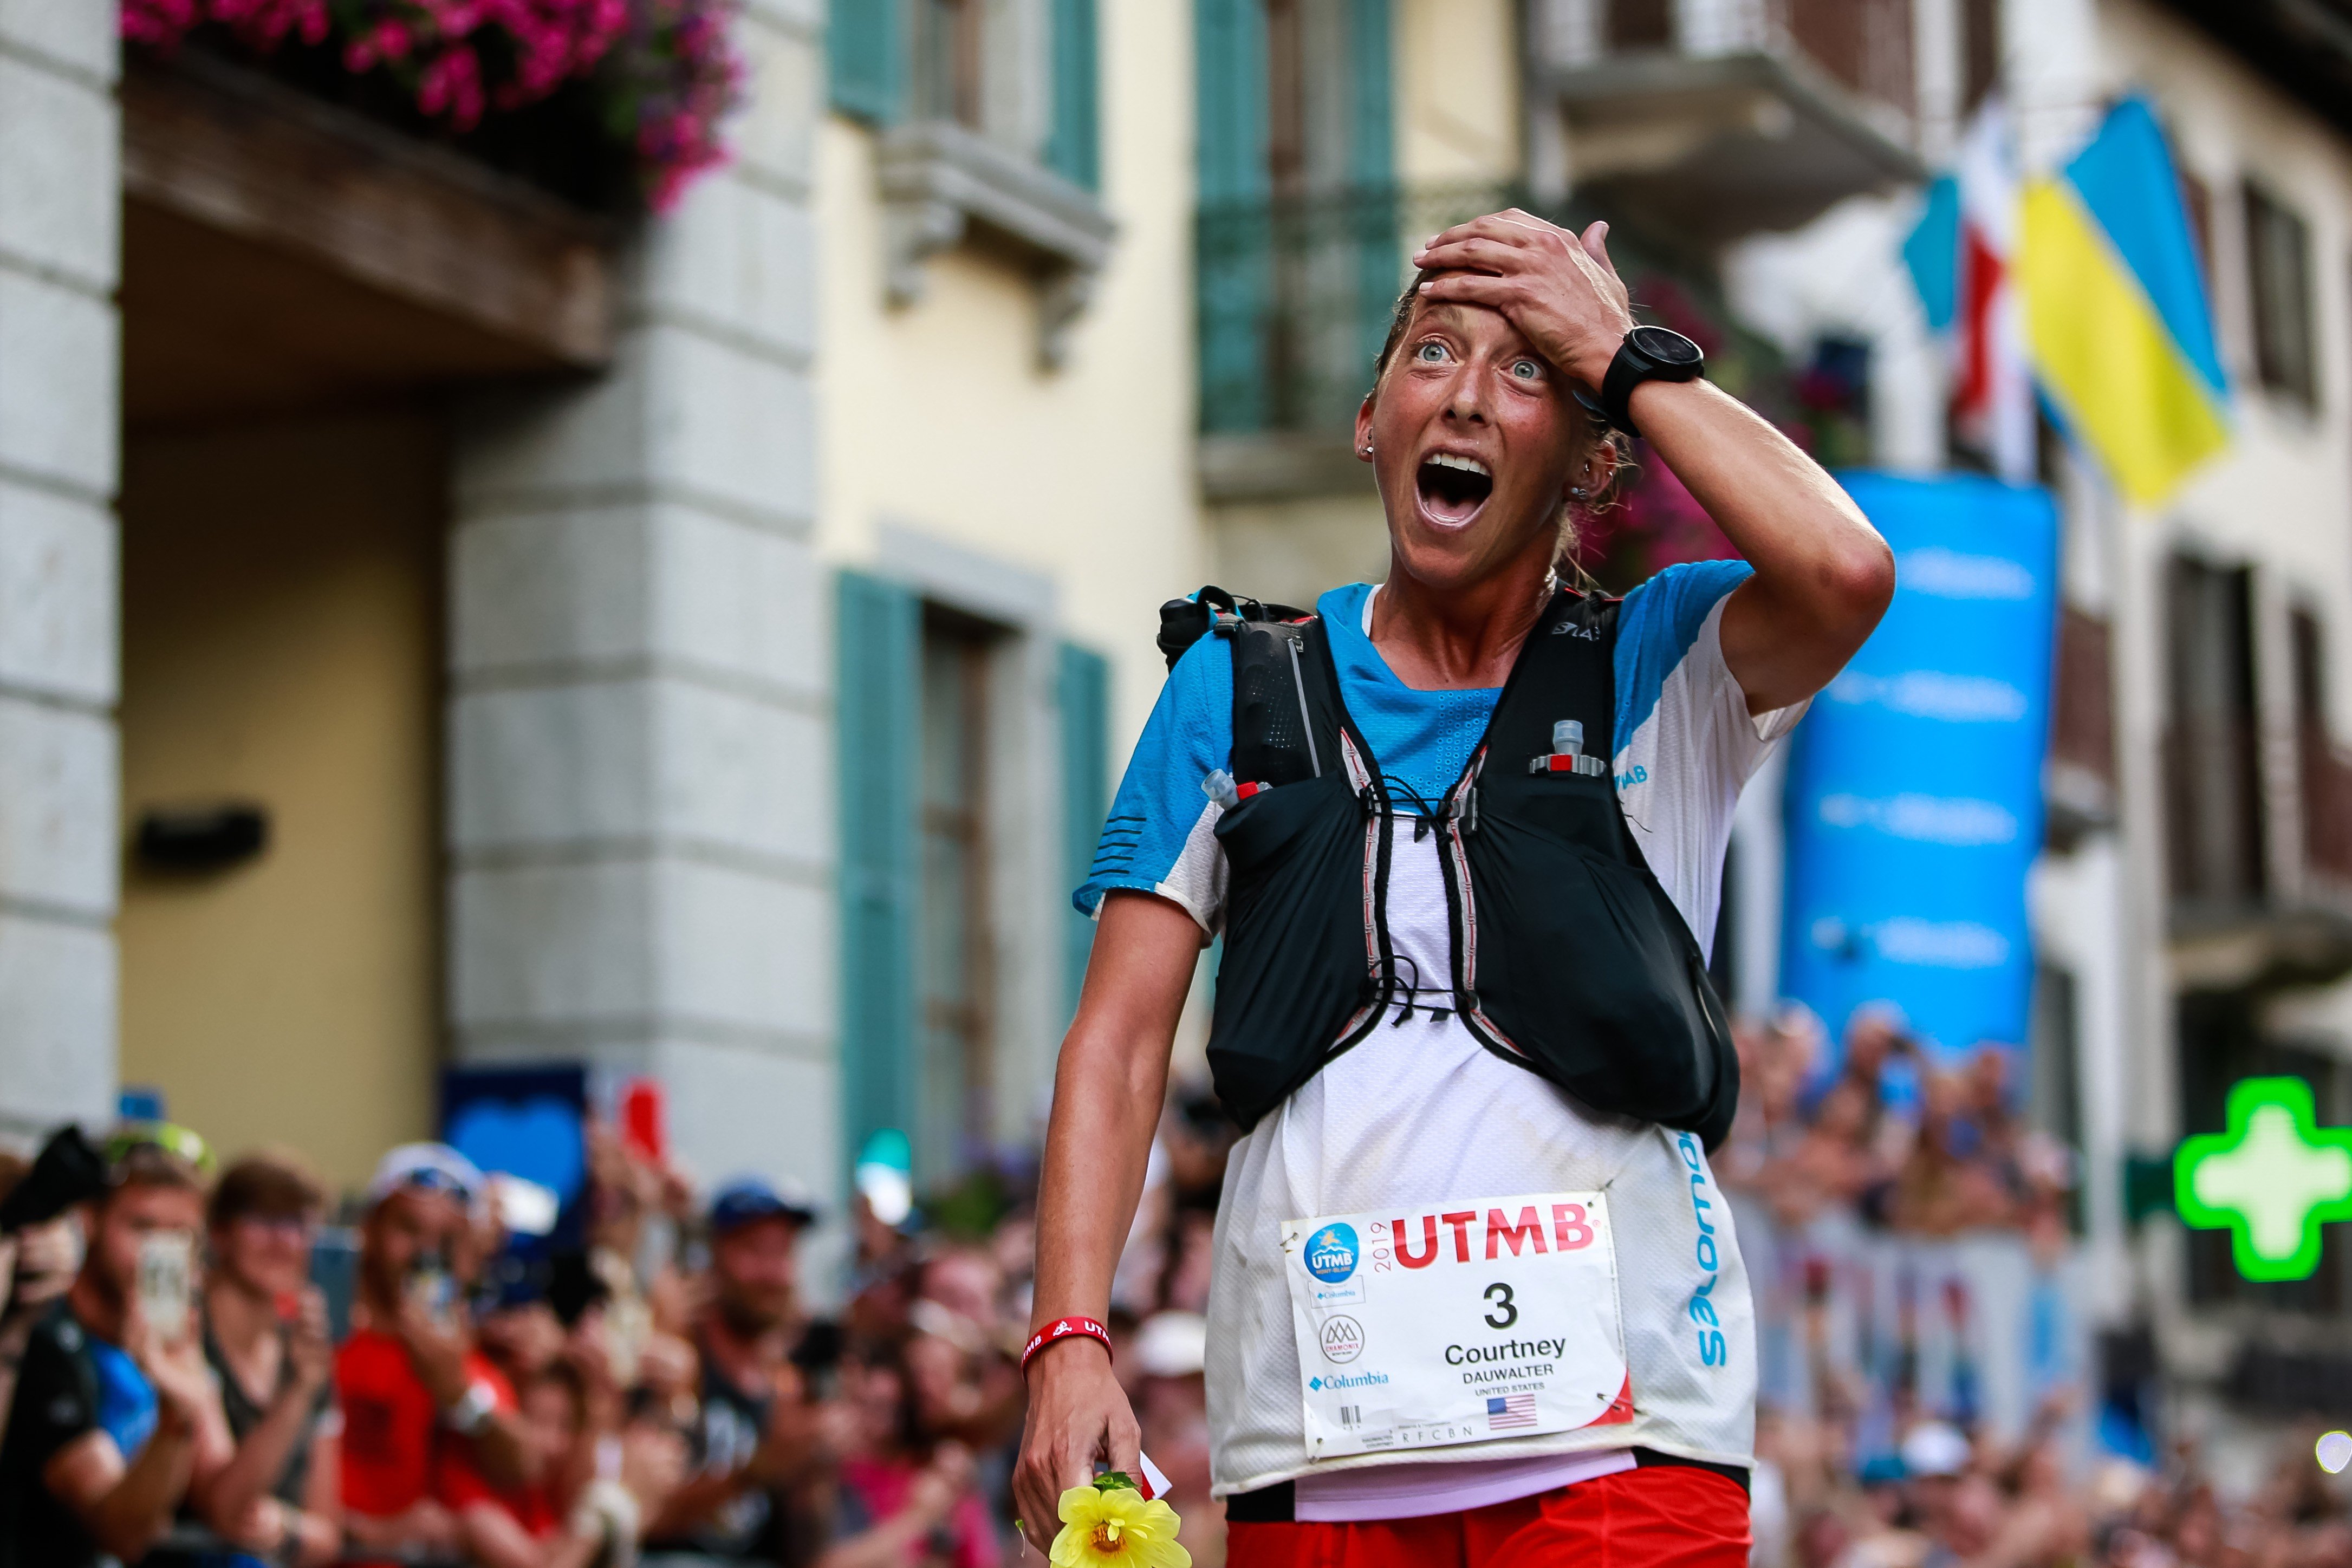 Courtney Dauwalter S Utmb Win Elevates Her From One Of The Greats